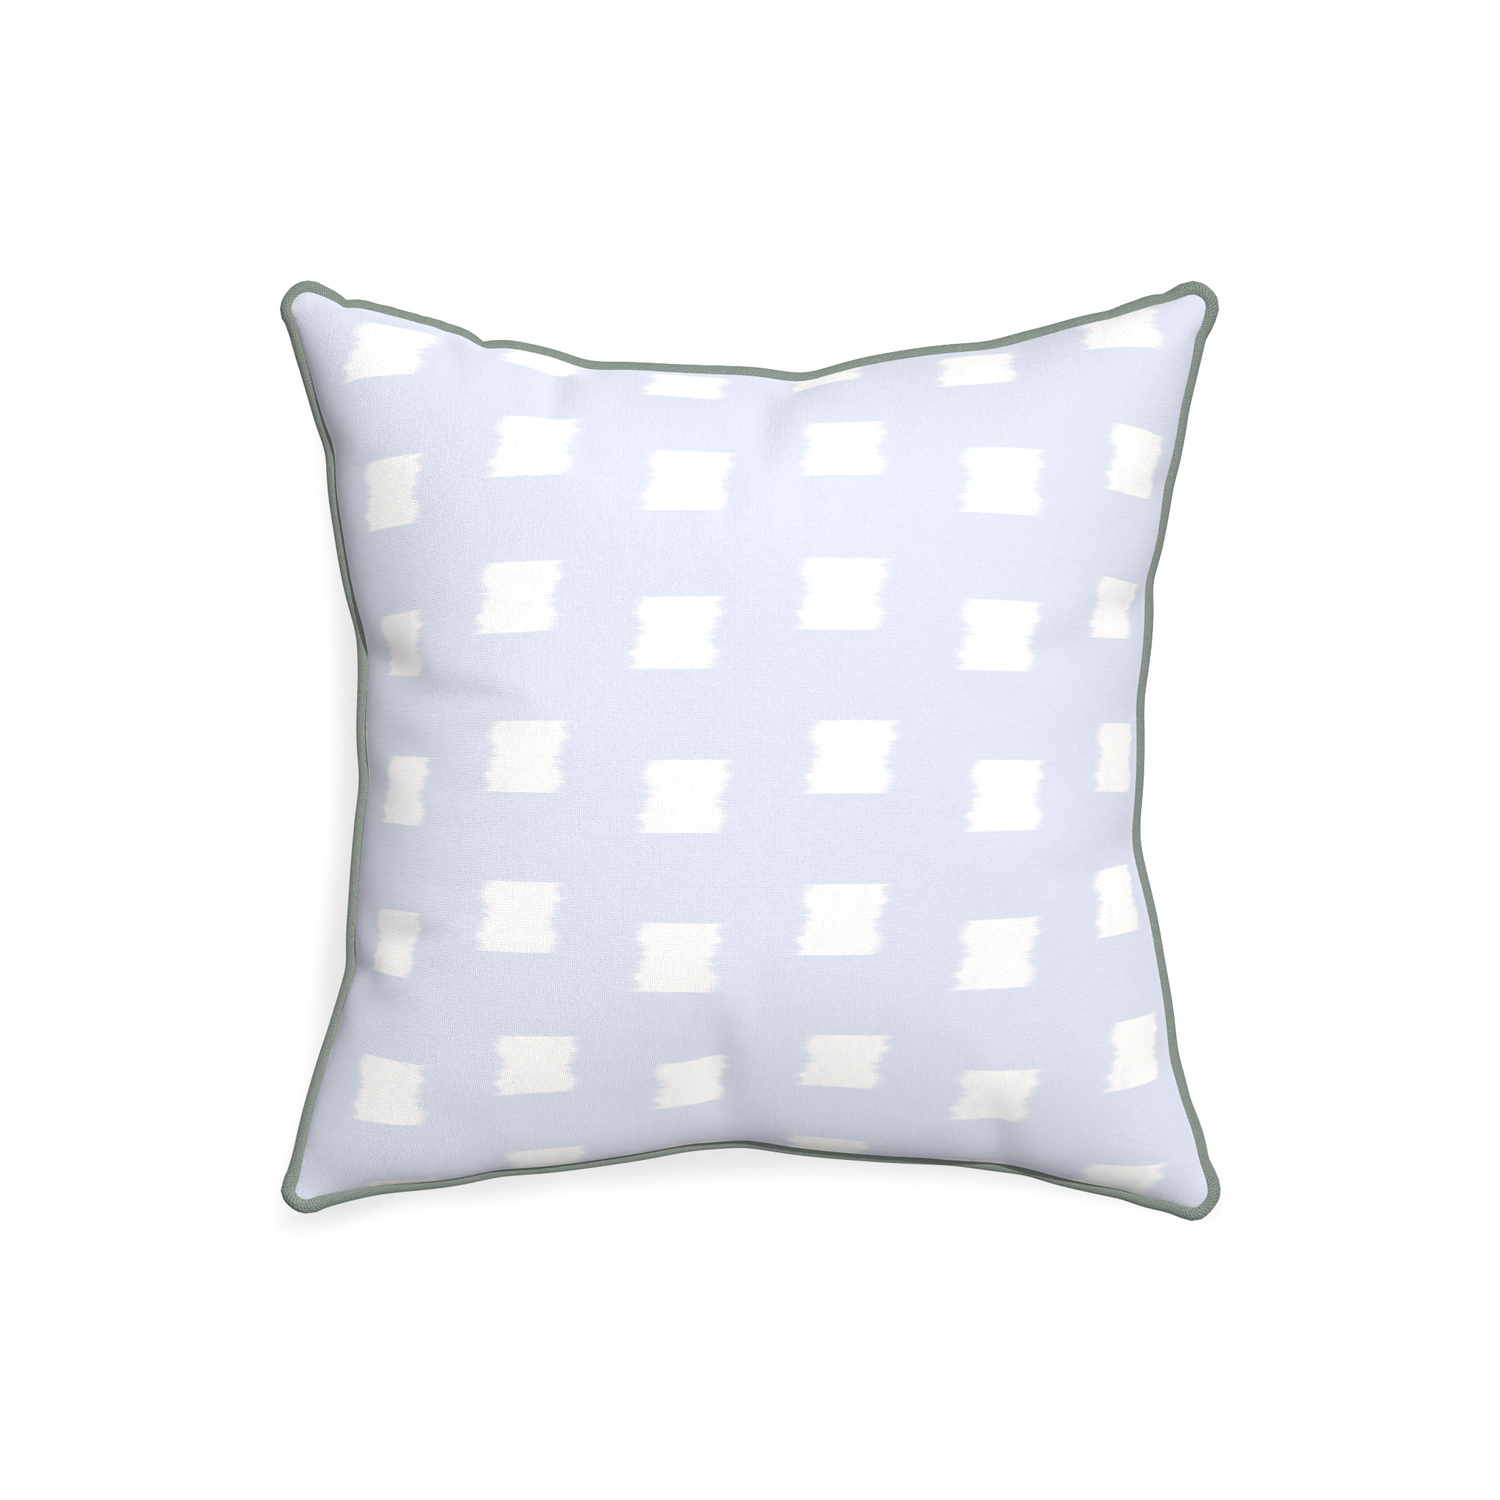 20-square denton custom sky blue patternpillow with sage piping on white background